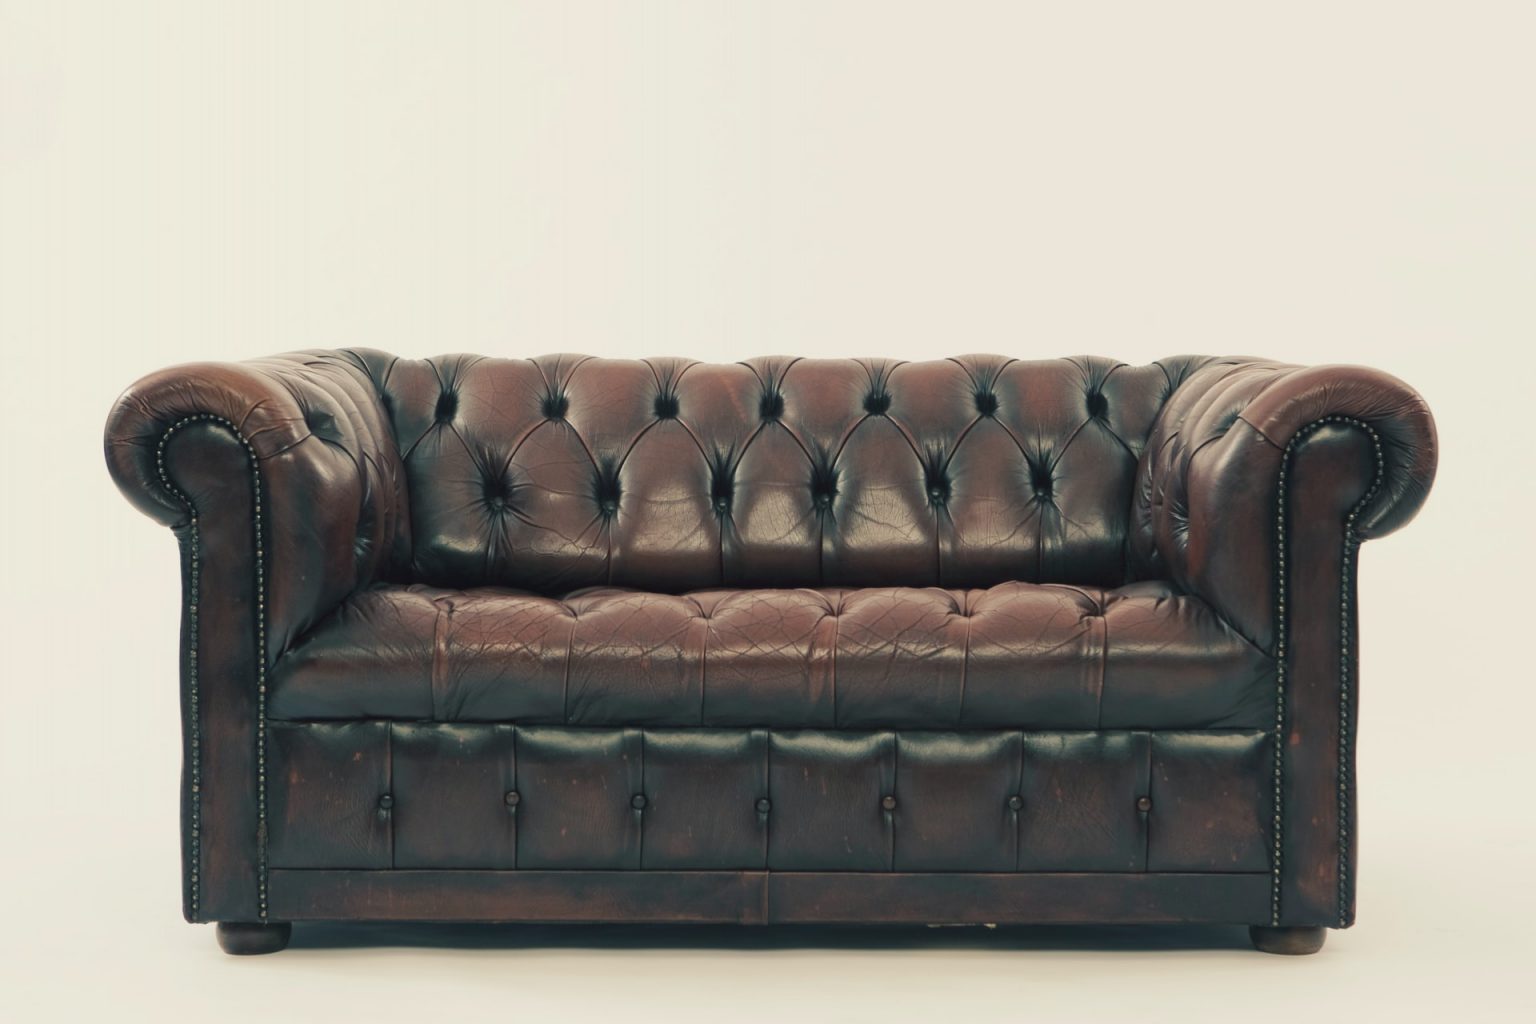 can you steam clean my leather sofa